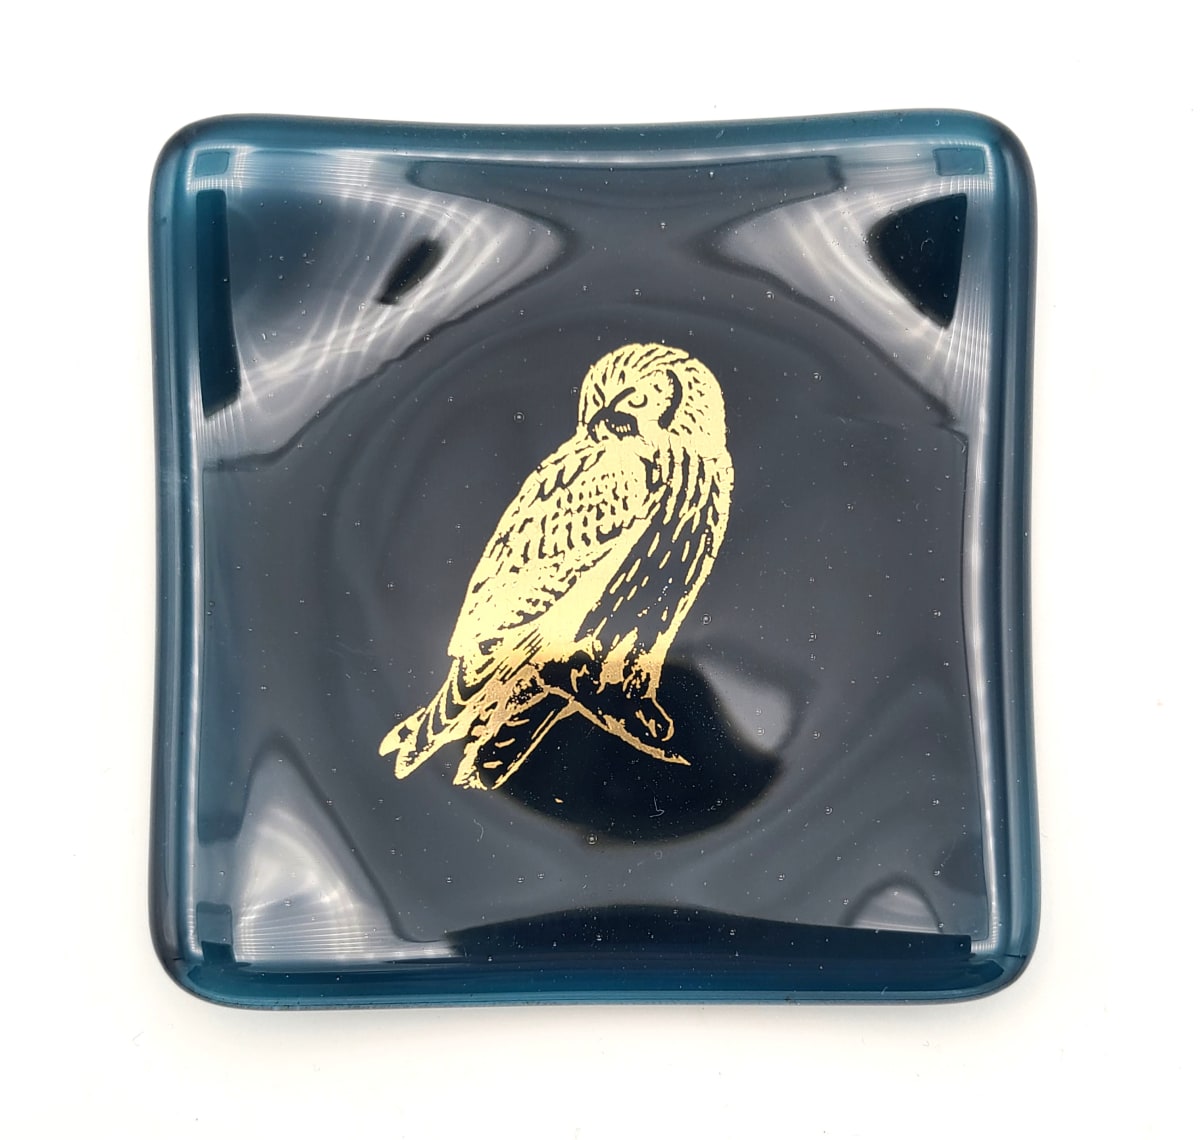 Small Plate-Steel Blue with Gold Owl by Kathy Kollenburn 